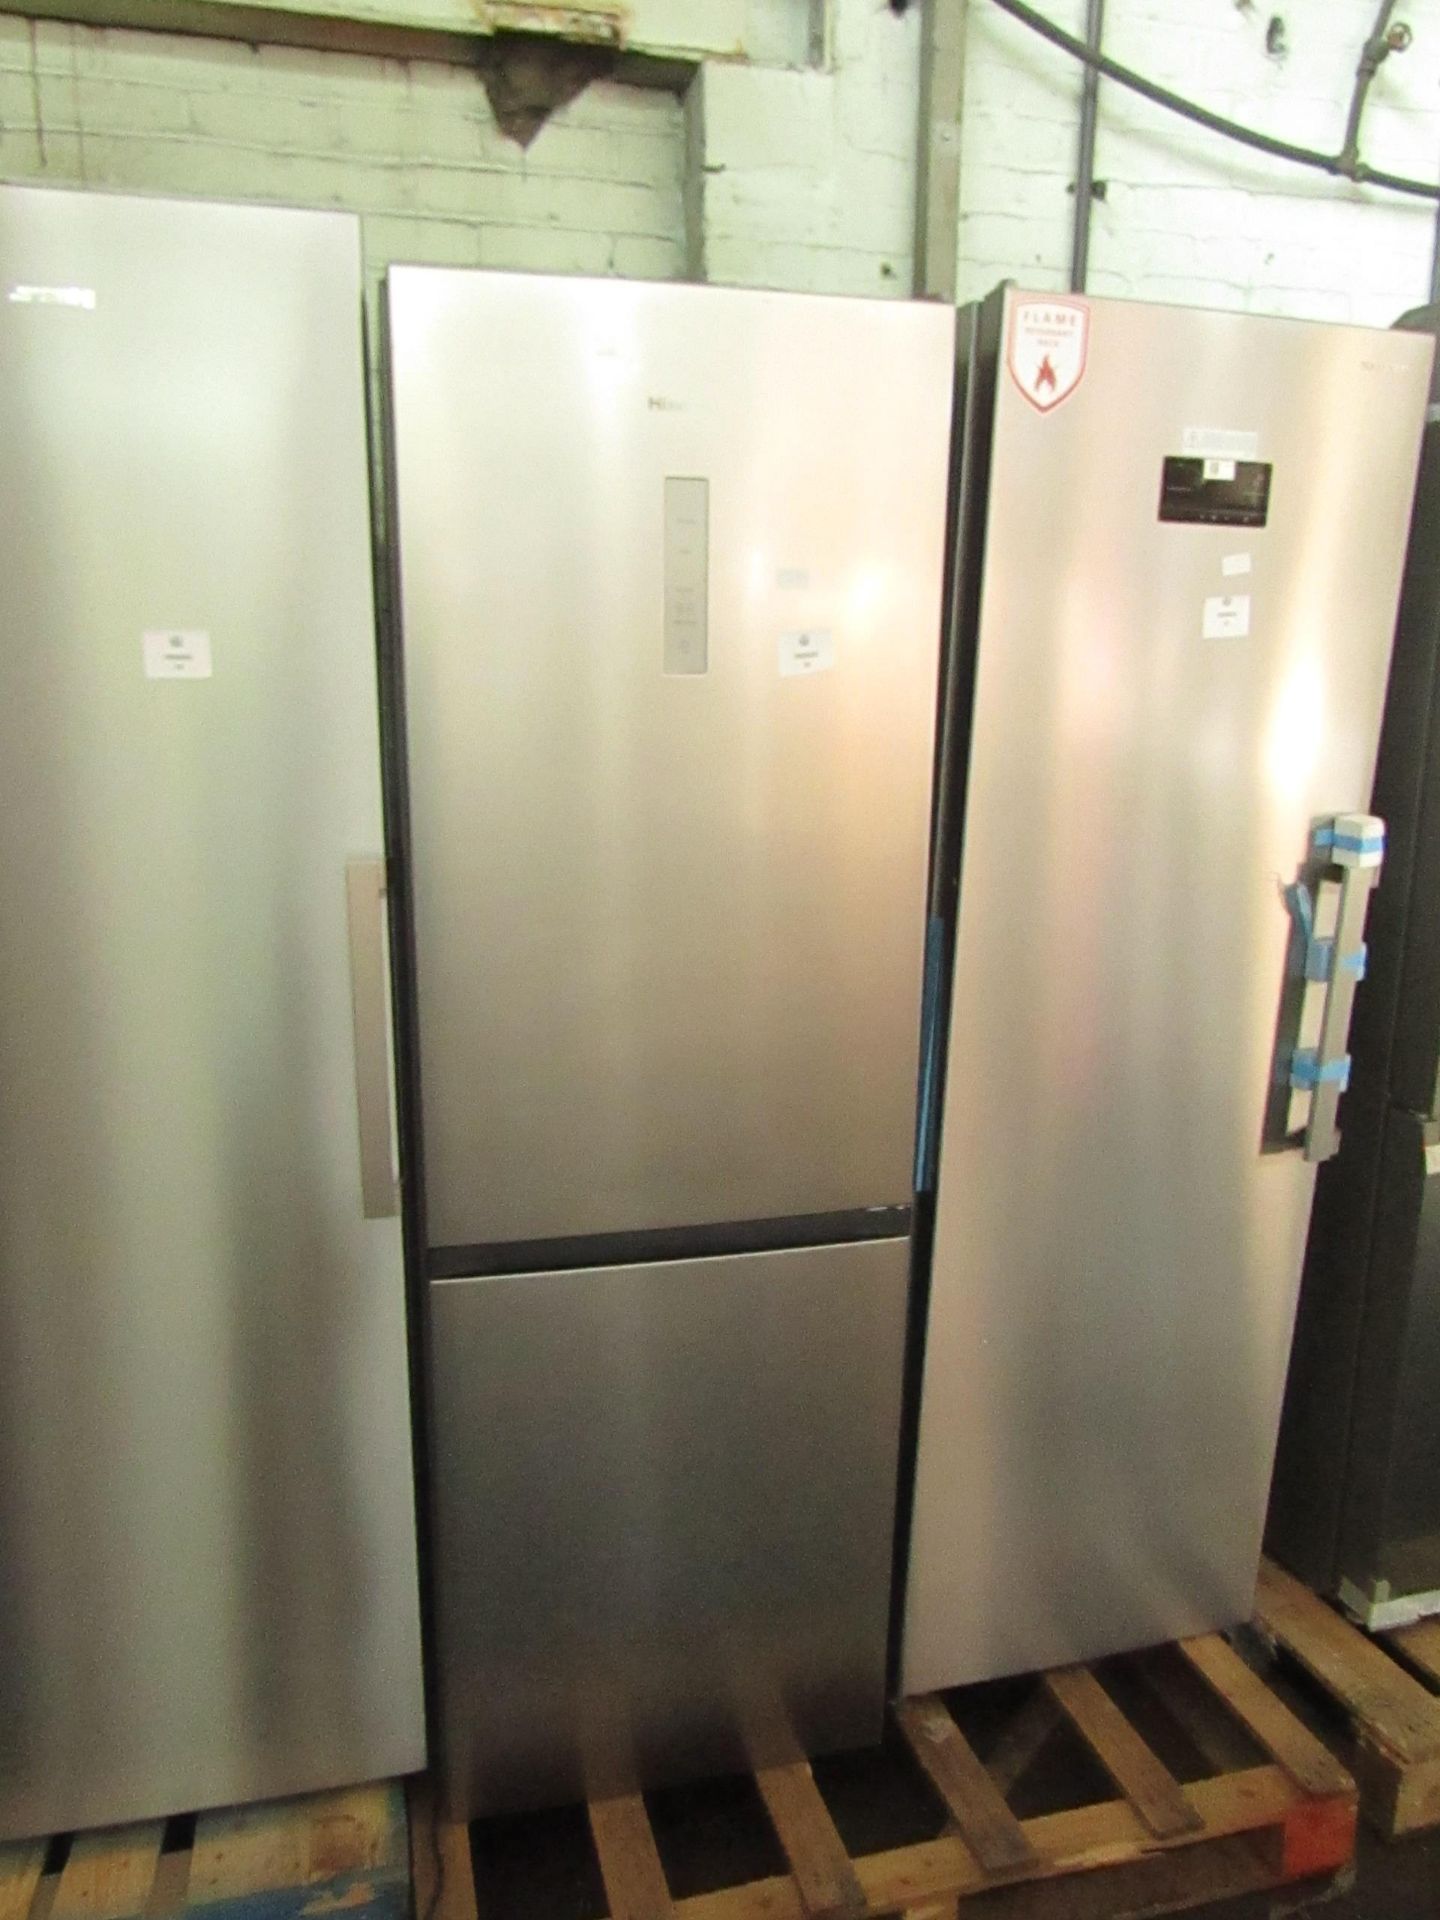 Hisense 60/40 fridge freezer, clean insode and a couple of small dents on the fridge door, tested